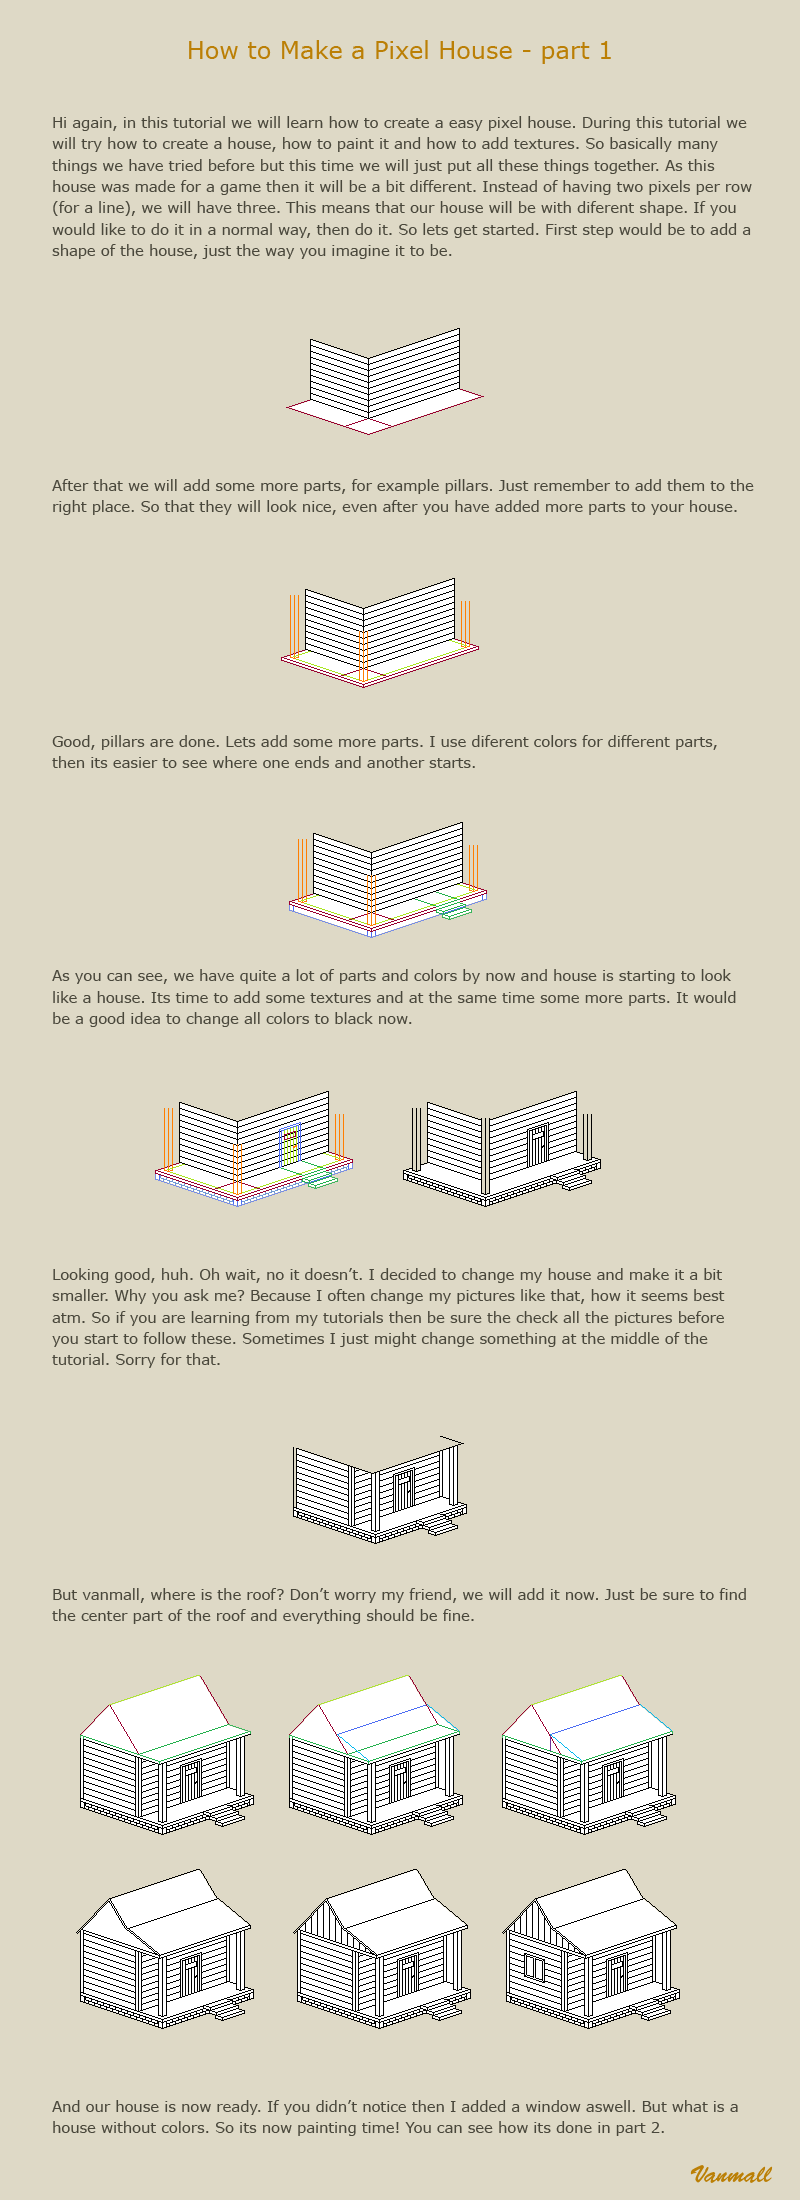 How to make a pixel house 1